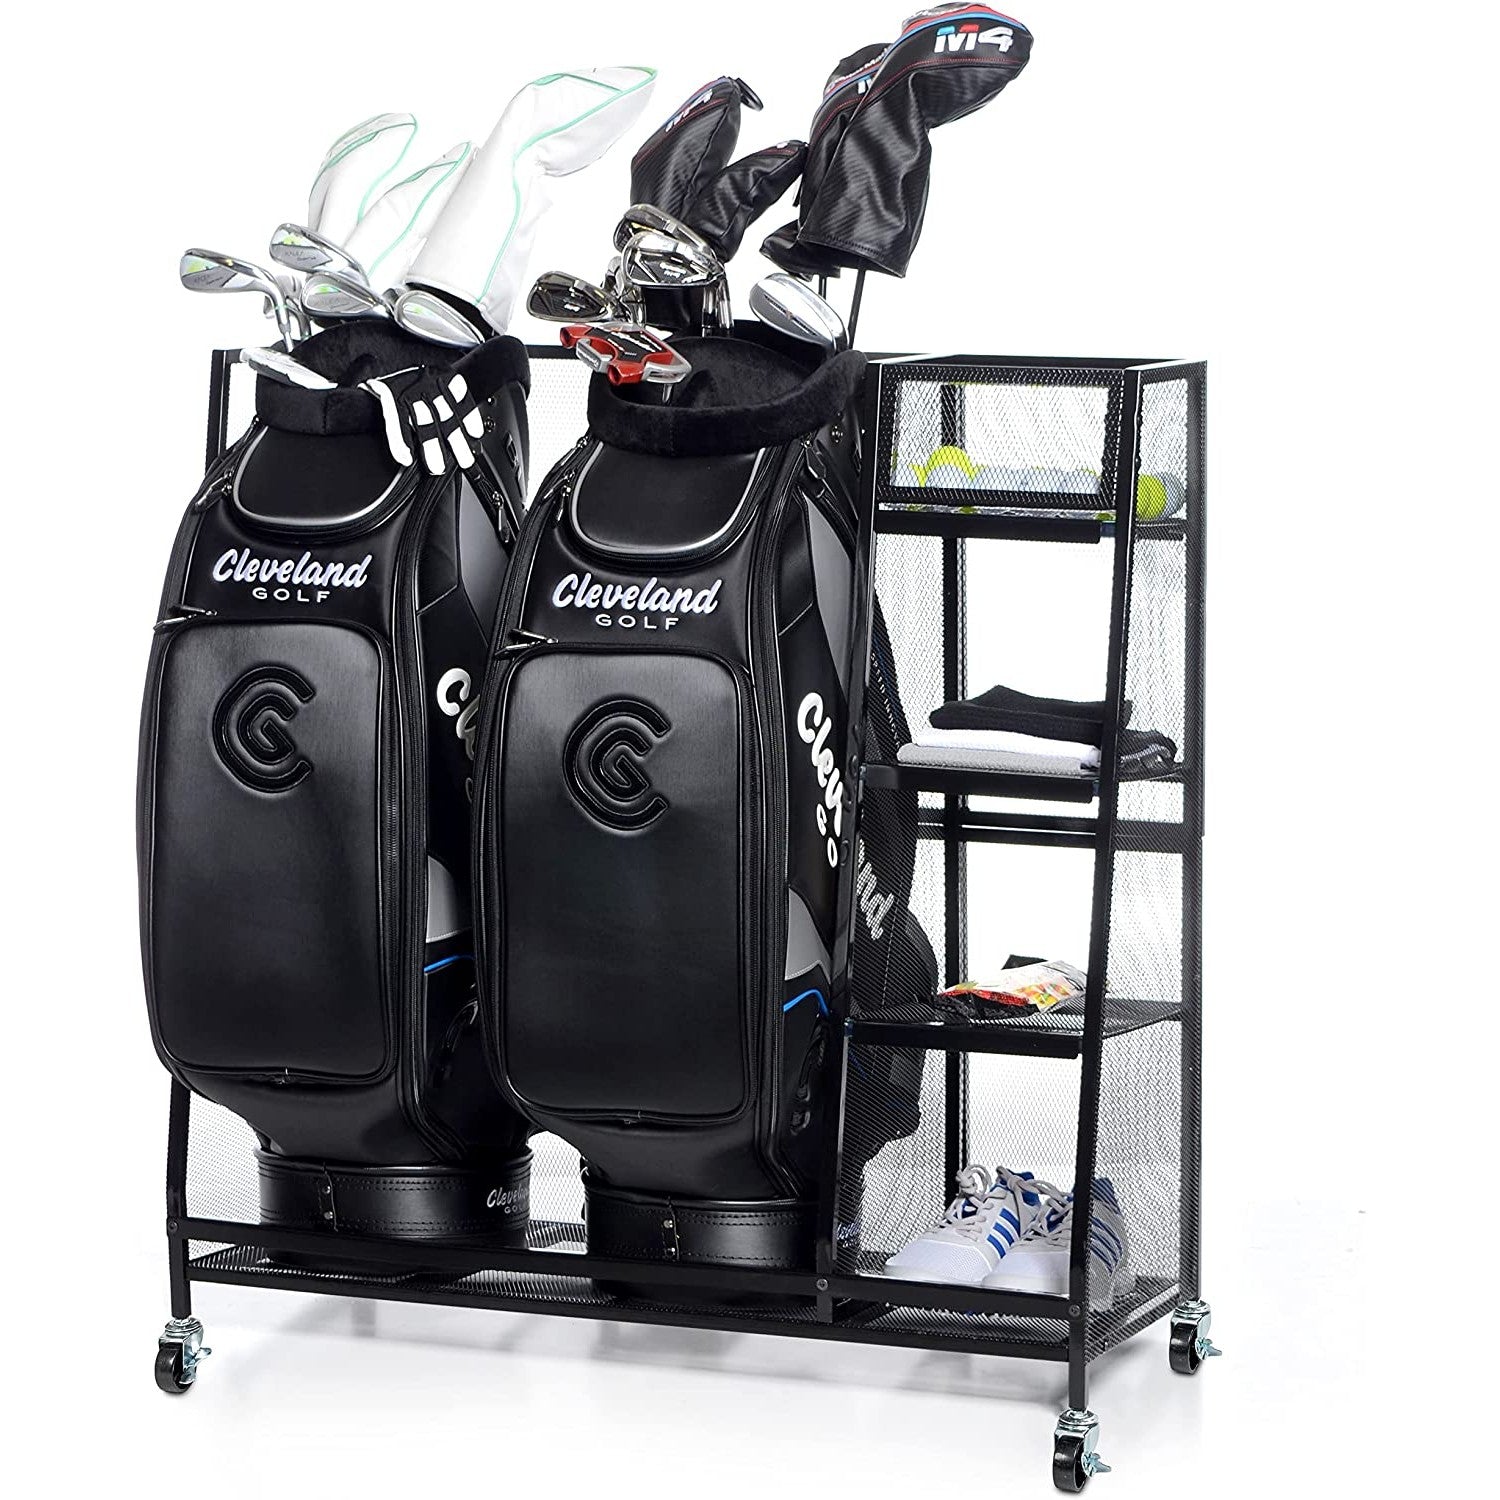 A side view of a golf storage rack organizer filled up with various golf equipment.